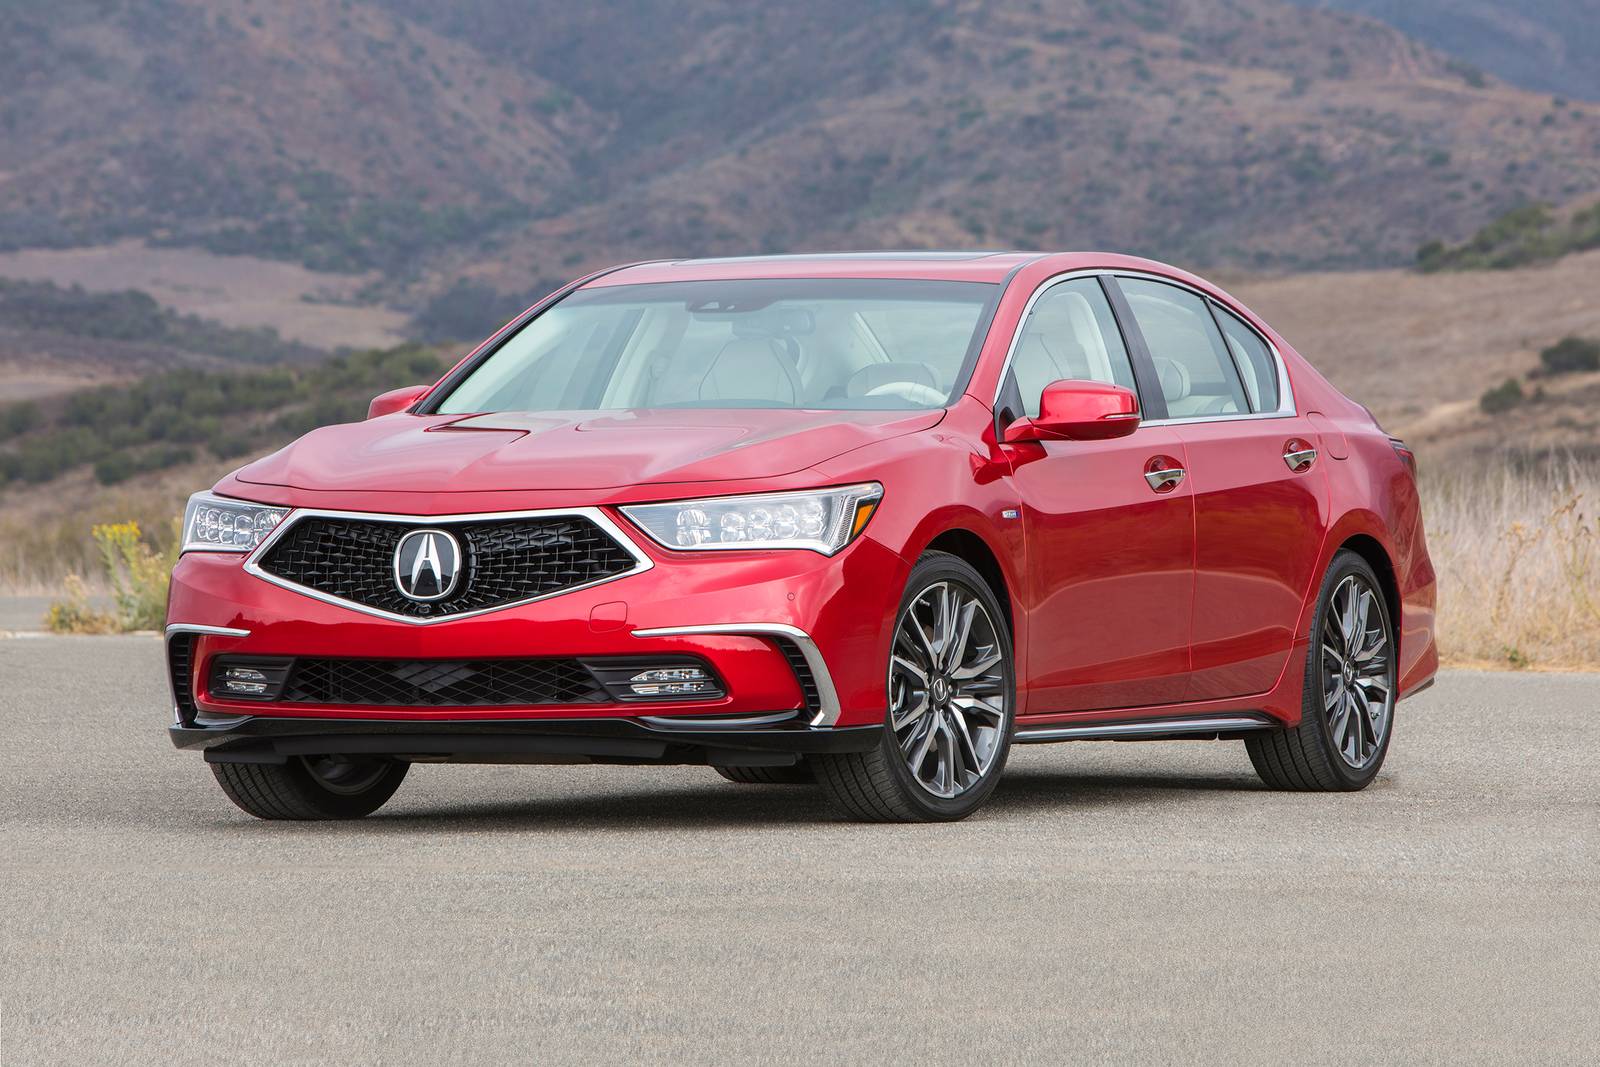 2020 Acura RLX Review & Ratings | Edmunds